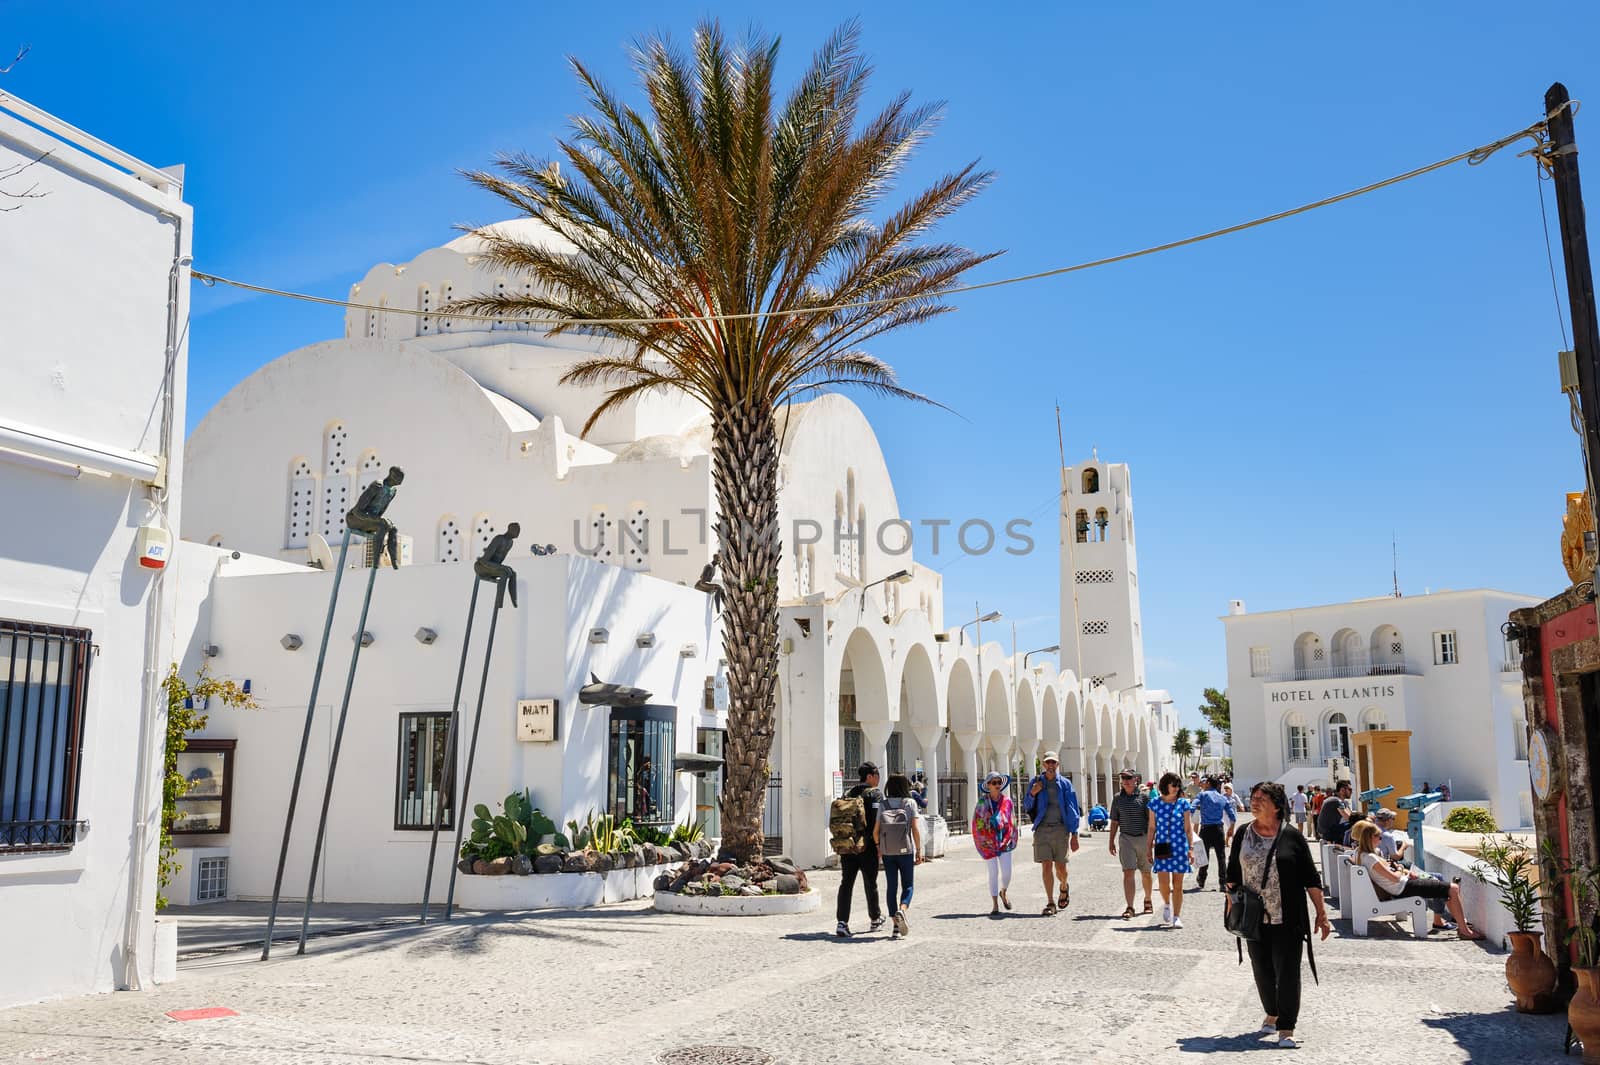 Fira, Santorini island, Greece - April 22nd, 2016: People walking at the central street of Fira. The Orthodox Cathedral, Church of Ipapanti, built in the 19th century sits prominently in the centre of Fira, the capital town of Santorini Island. Santorini is one of most famous greek resorts situated in Aegean sea at old volcano's caldera.